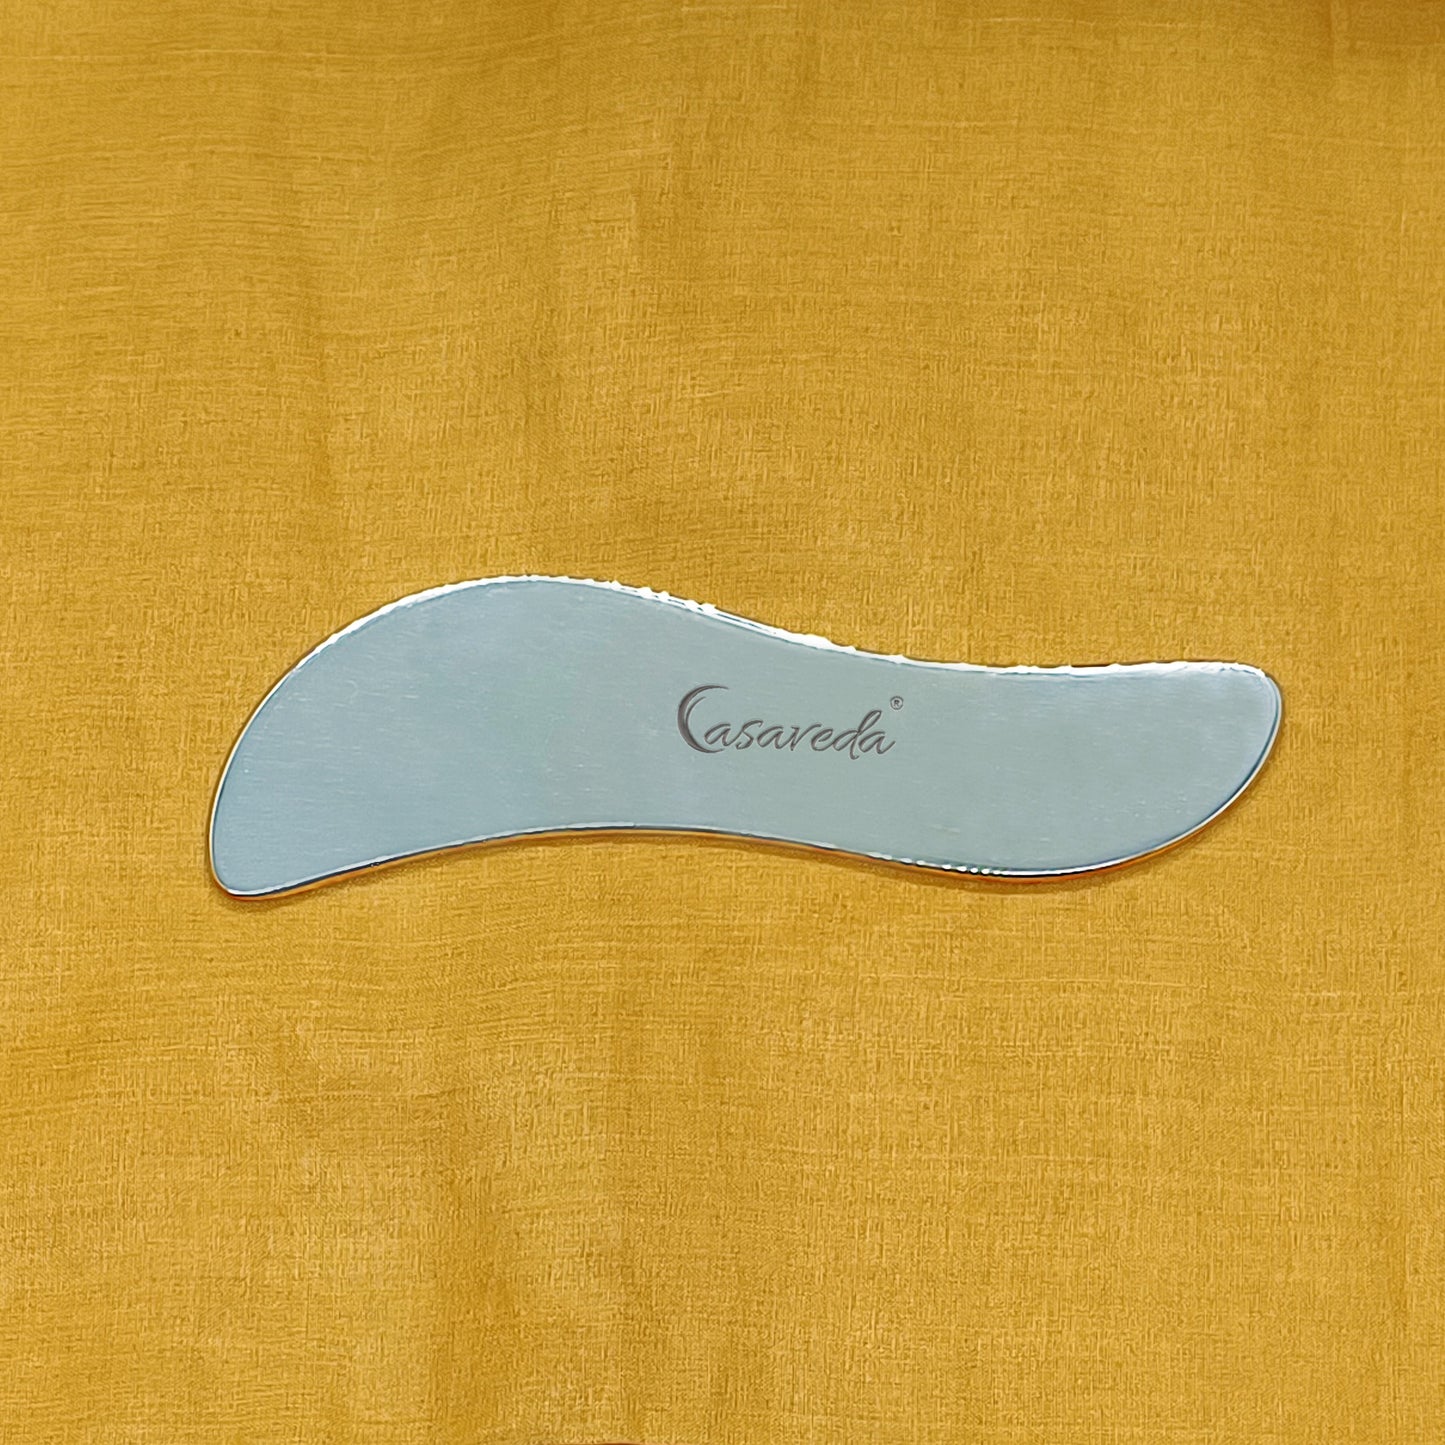 Stainless Steel Gua Sha Massager IASTM Tool For Massage (S-Shaped)